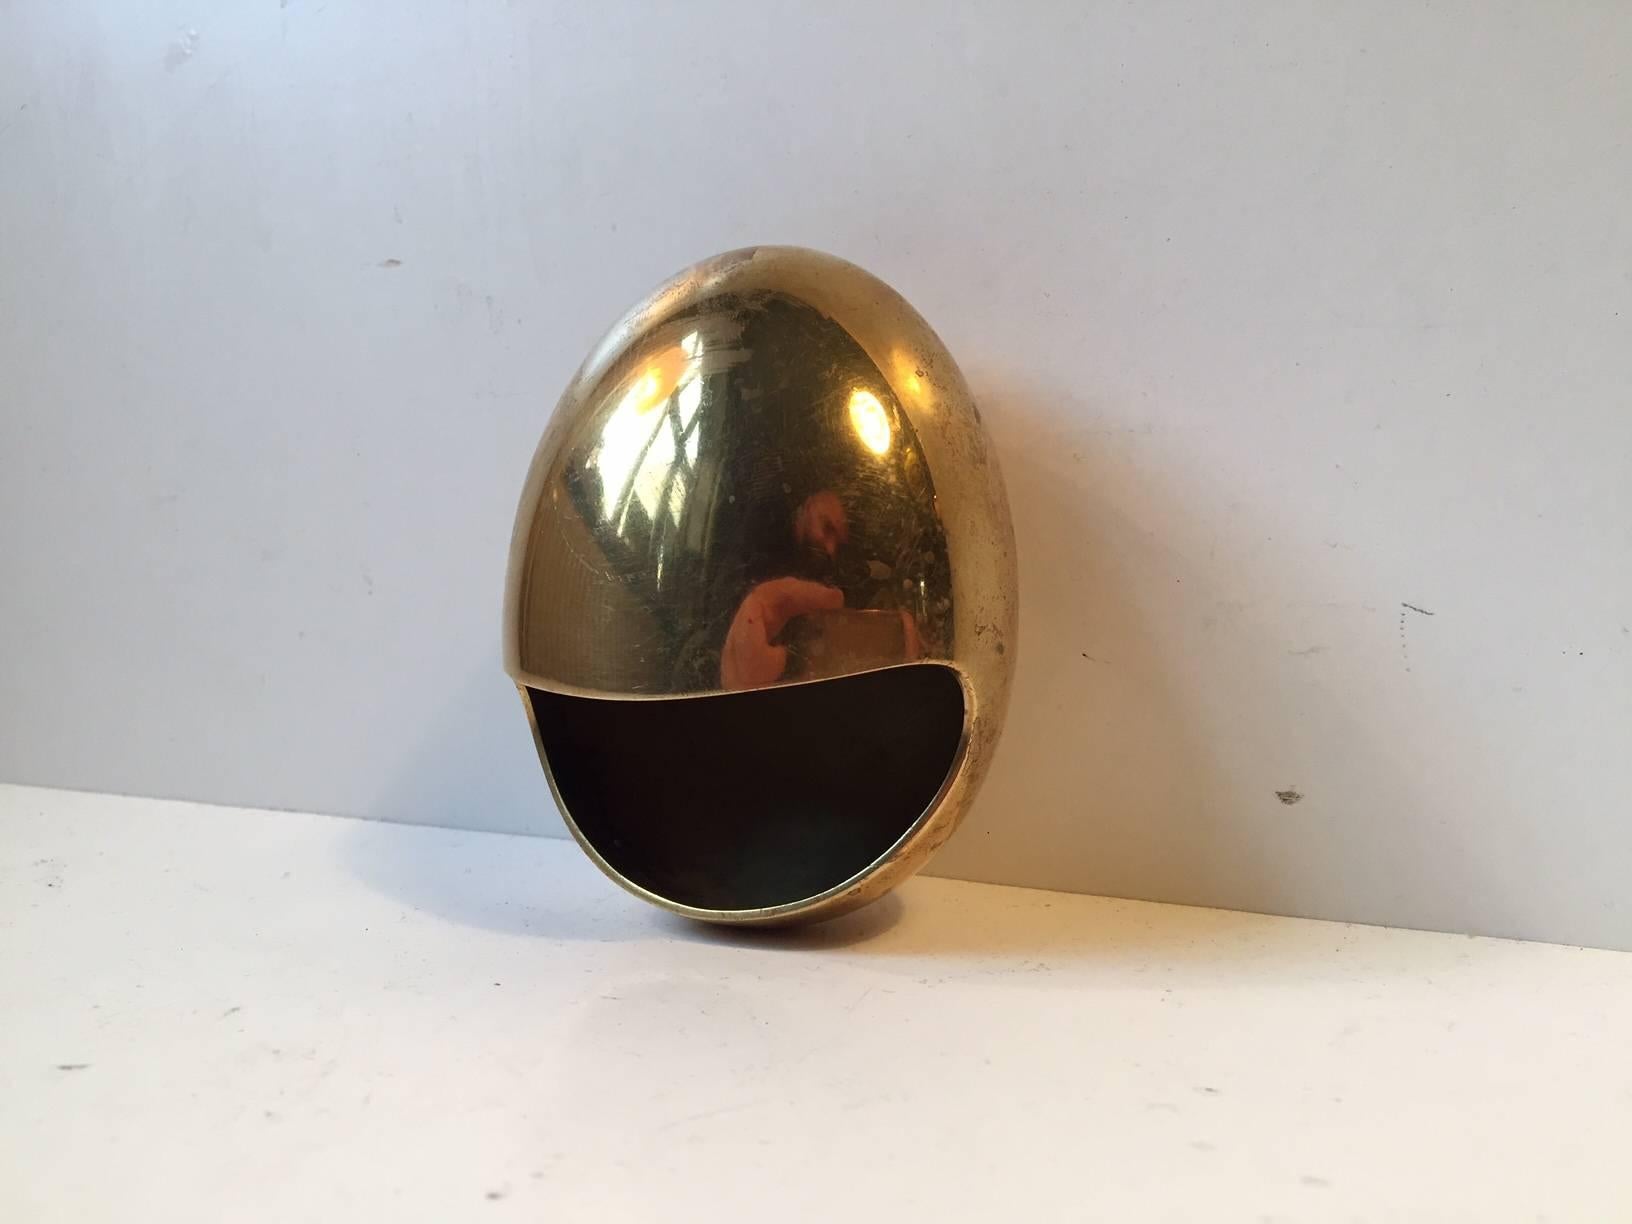 Egg shaped solid brass ashtray designed and manufactured by Carl Cohr in Fredericia Denmark during the 1950s. Stamped Cohr, Denmark to the base. It remains in beautiful un-polished vintage condition with very light ware.